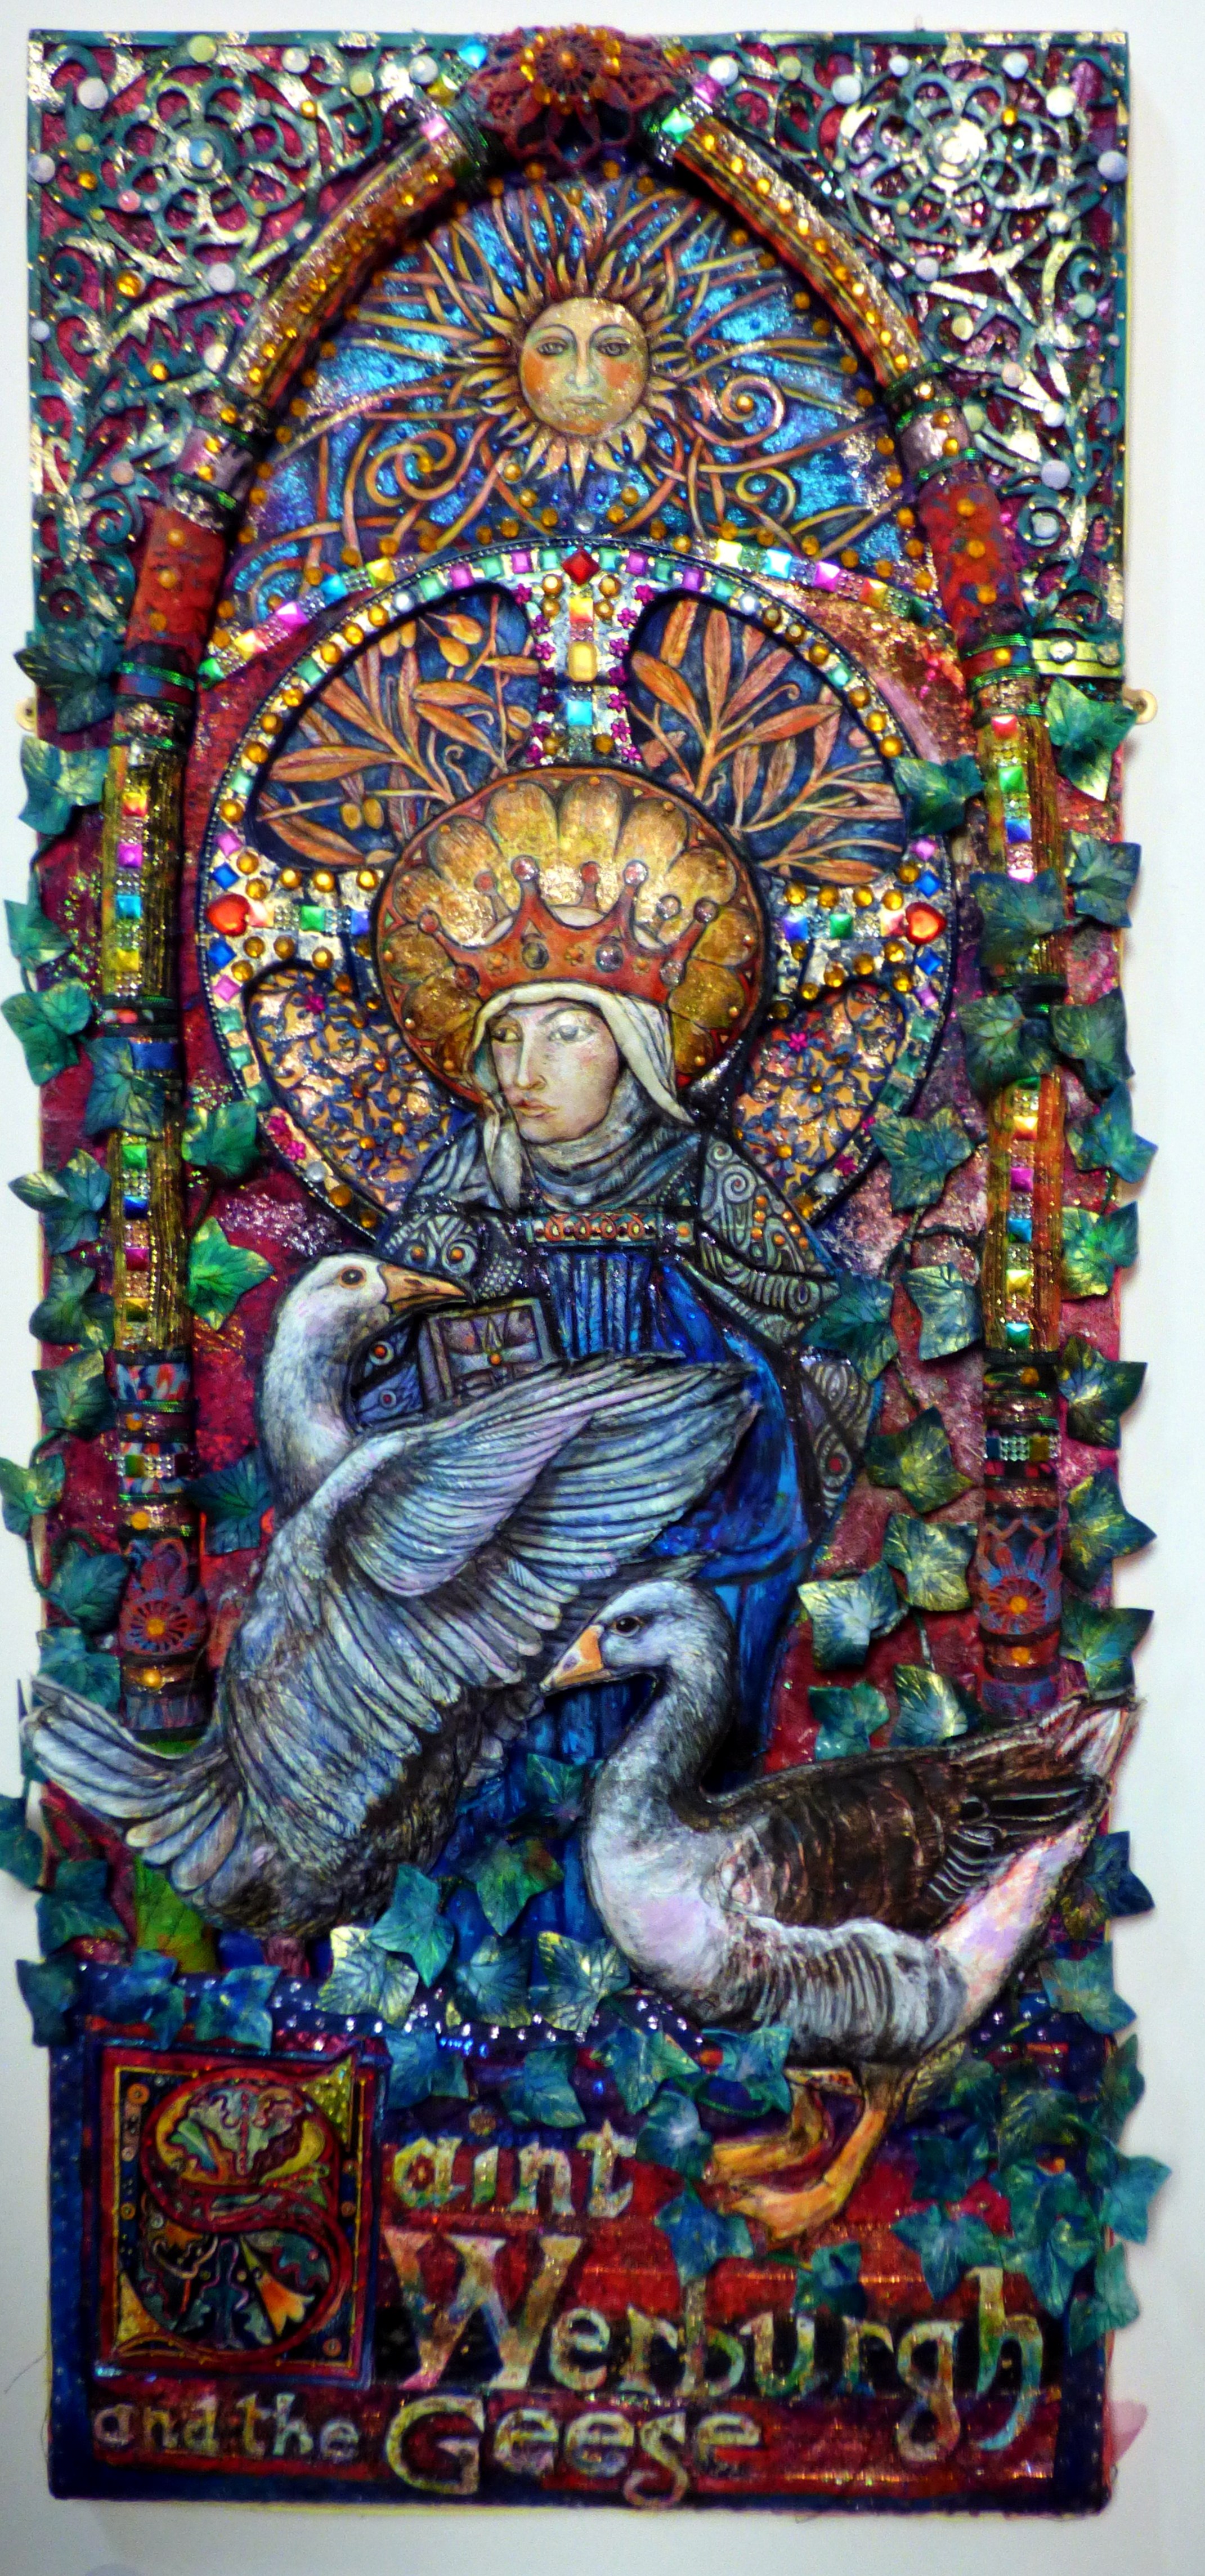 SAINT WERBURGH AND THE GEESE by Nikki Parmenter, mixed media, In All Its Glory exhibition, Chester Cathedral 2016